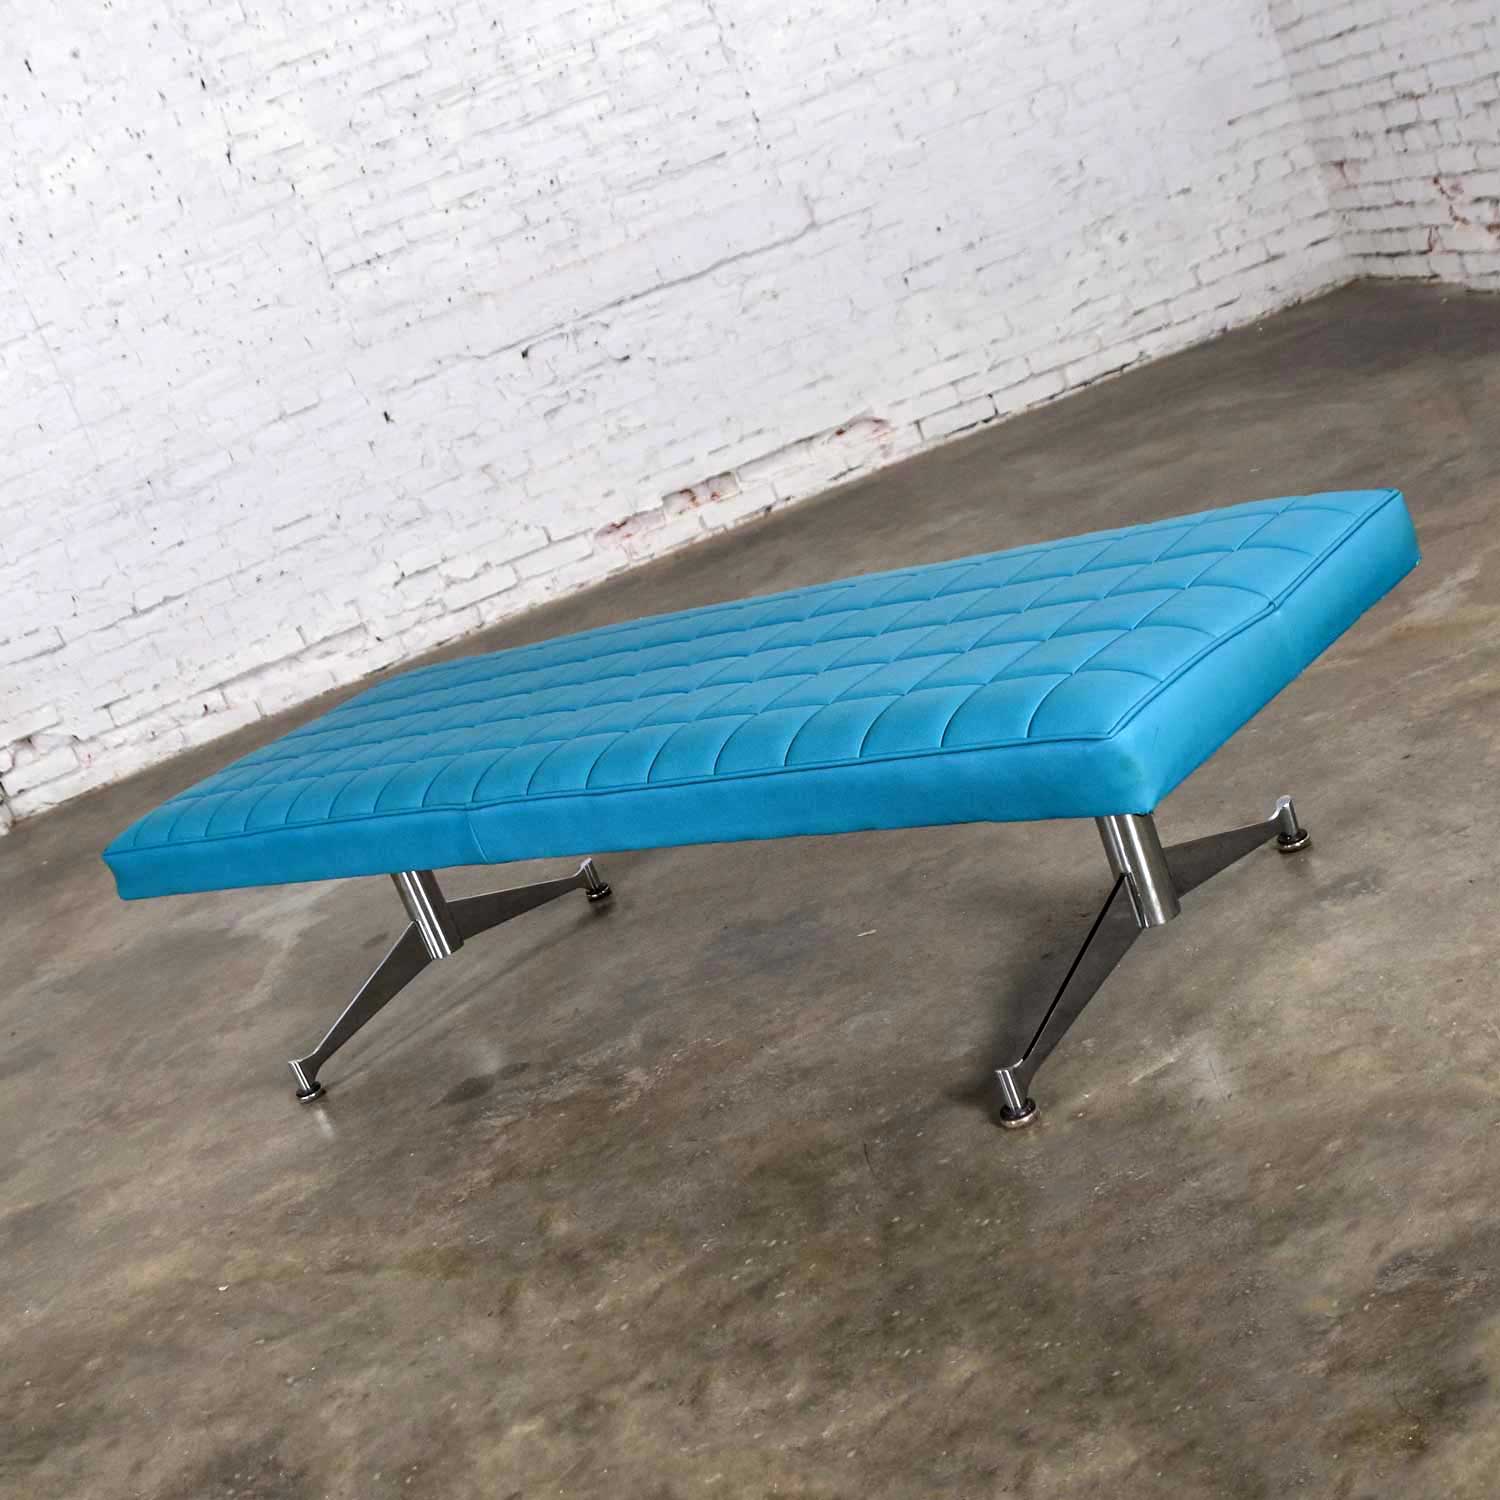 MCM Vinyl Faux Leather Turquoise & Chrome Bench Daybed Style of Arthur Umanoff for Madison Furniture Co.